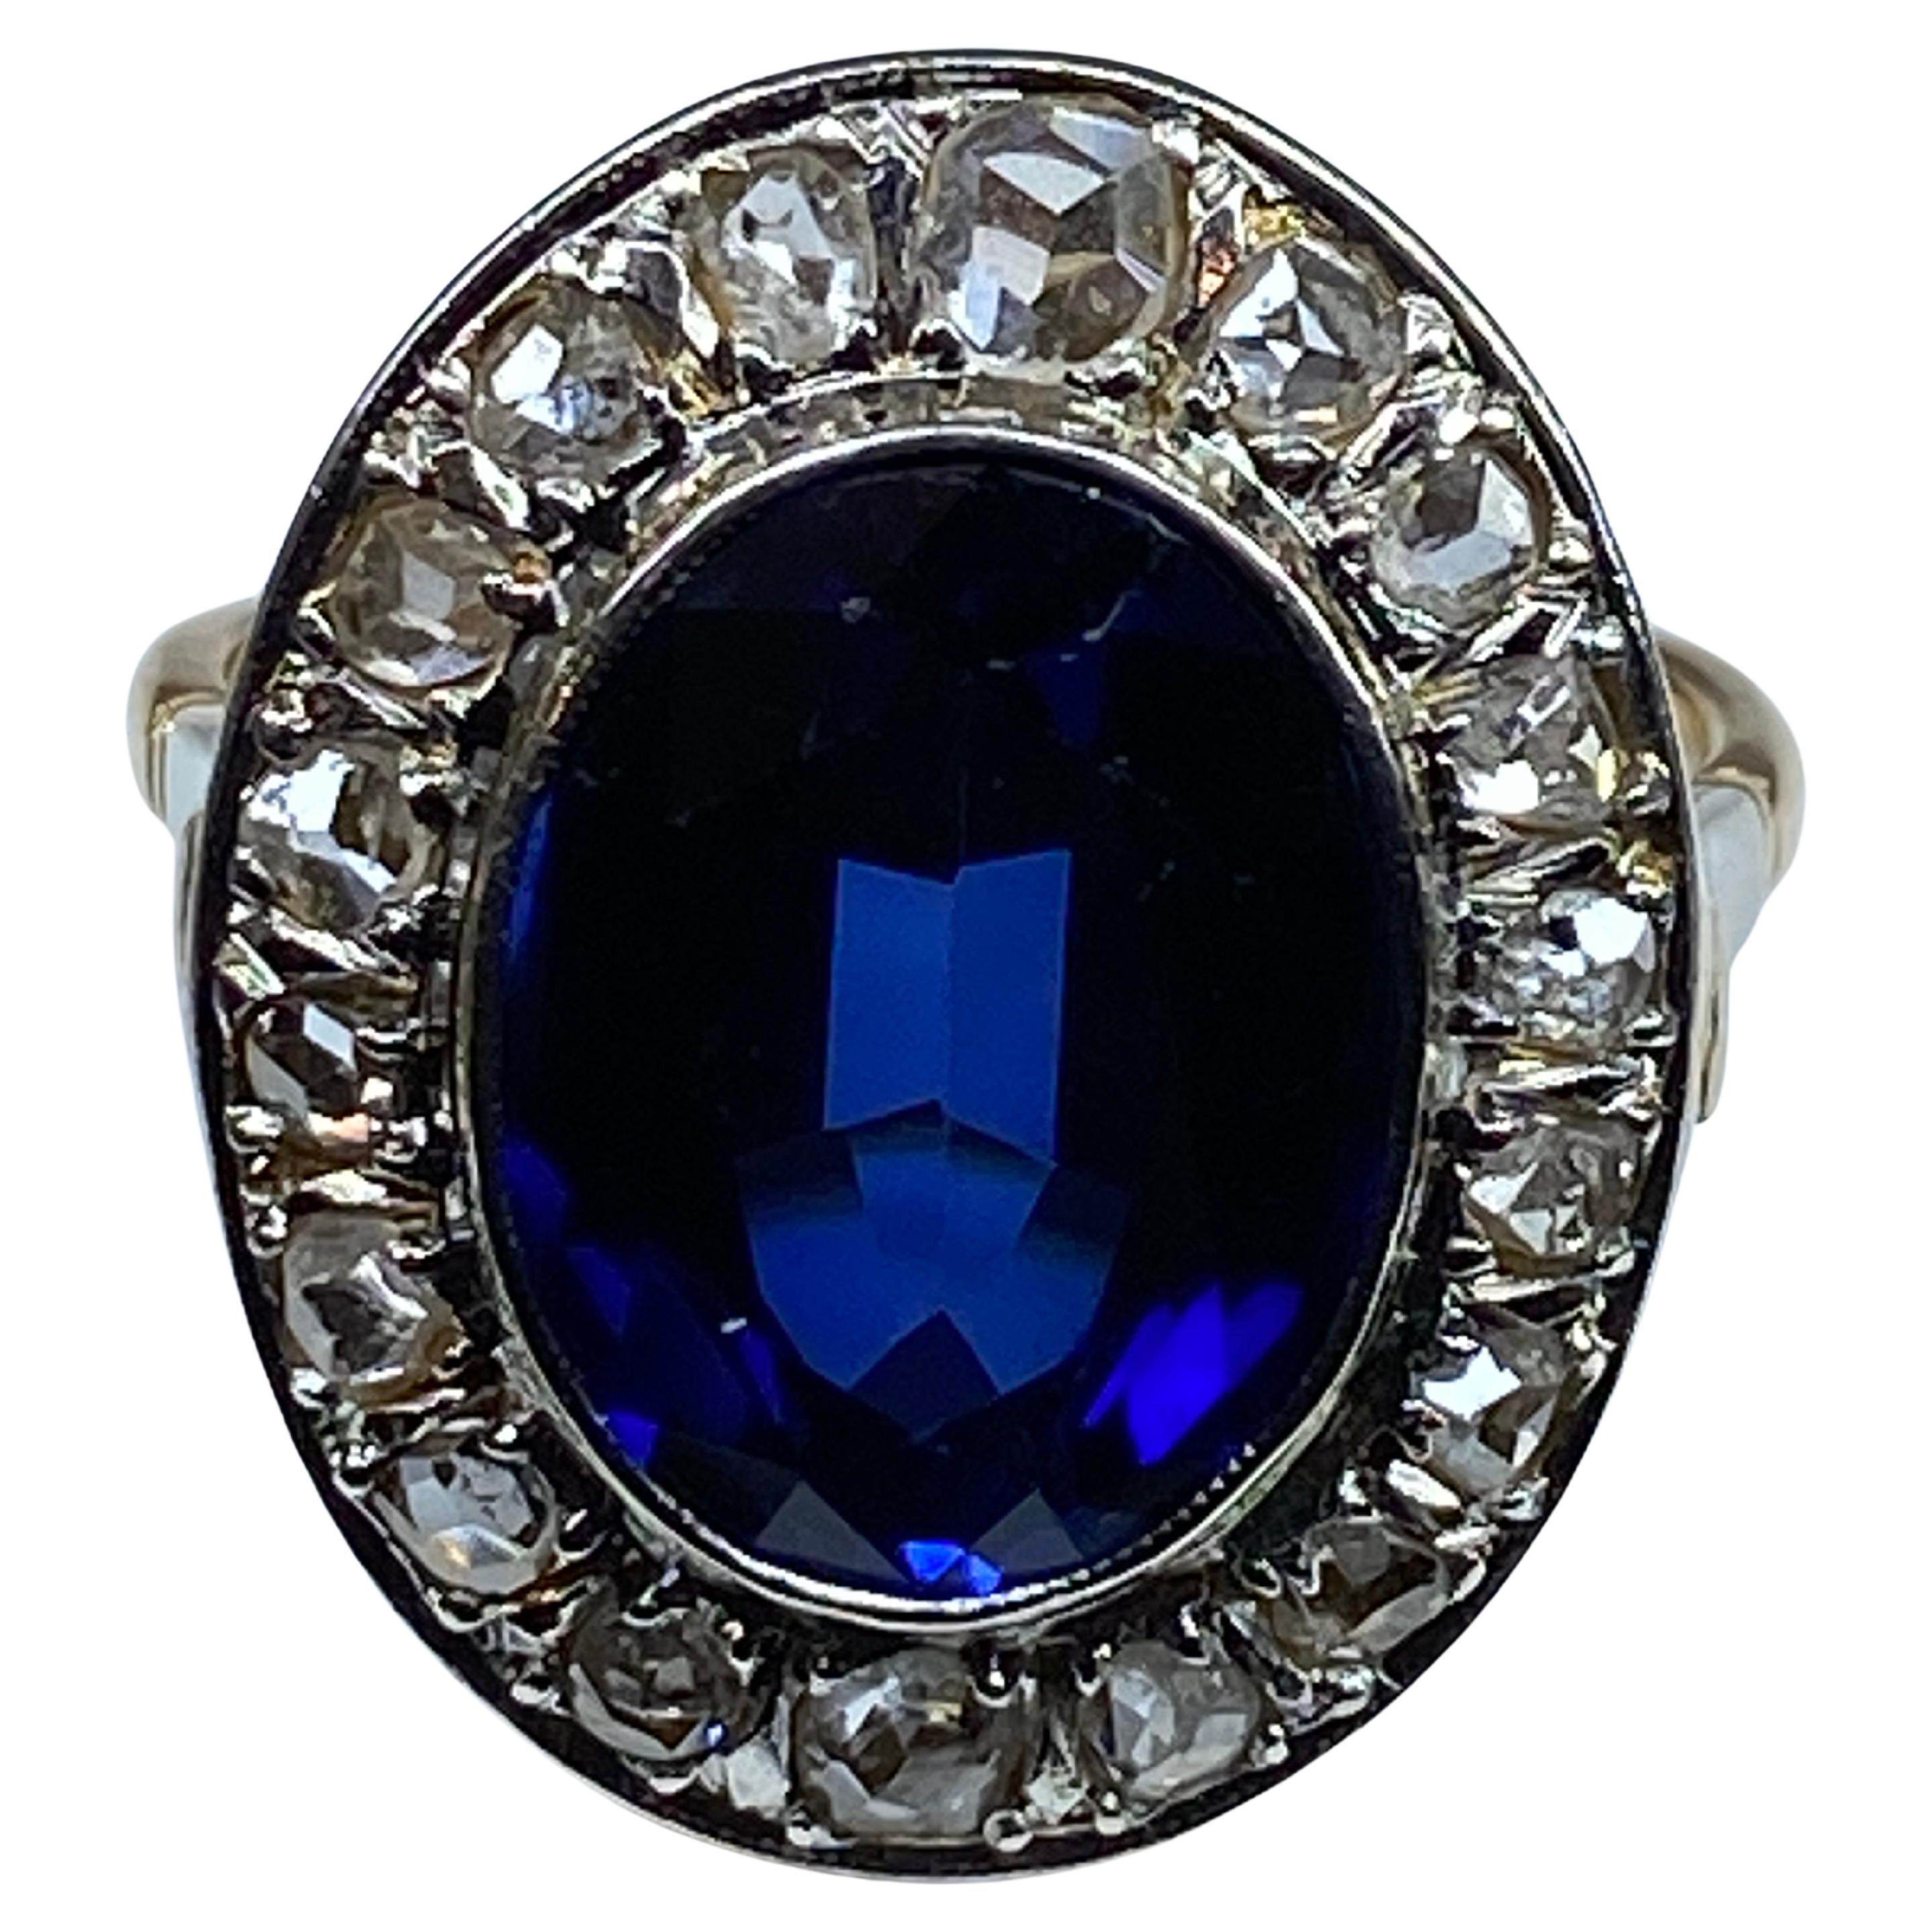 18 Carat Gold Ring Verneuil Sapphire and Rose-Cut Diamonds, 1900 Period